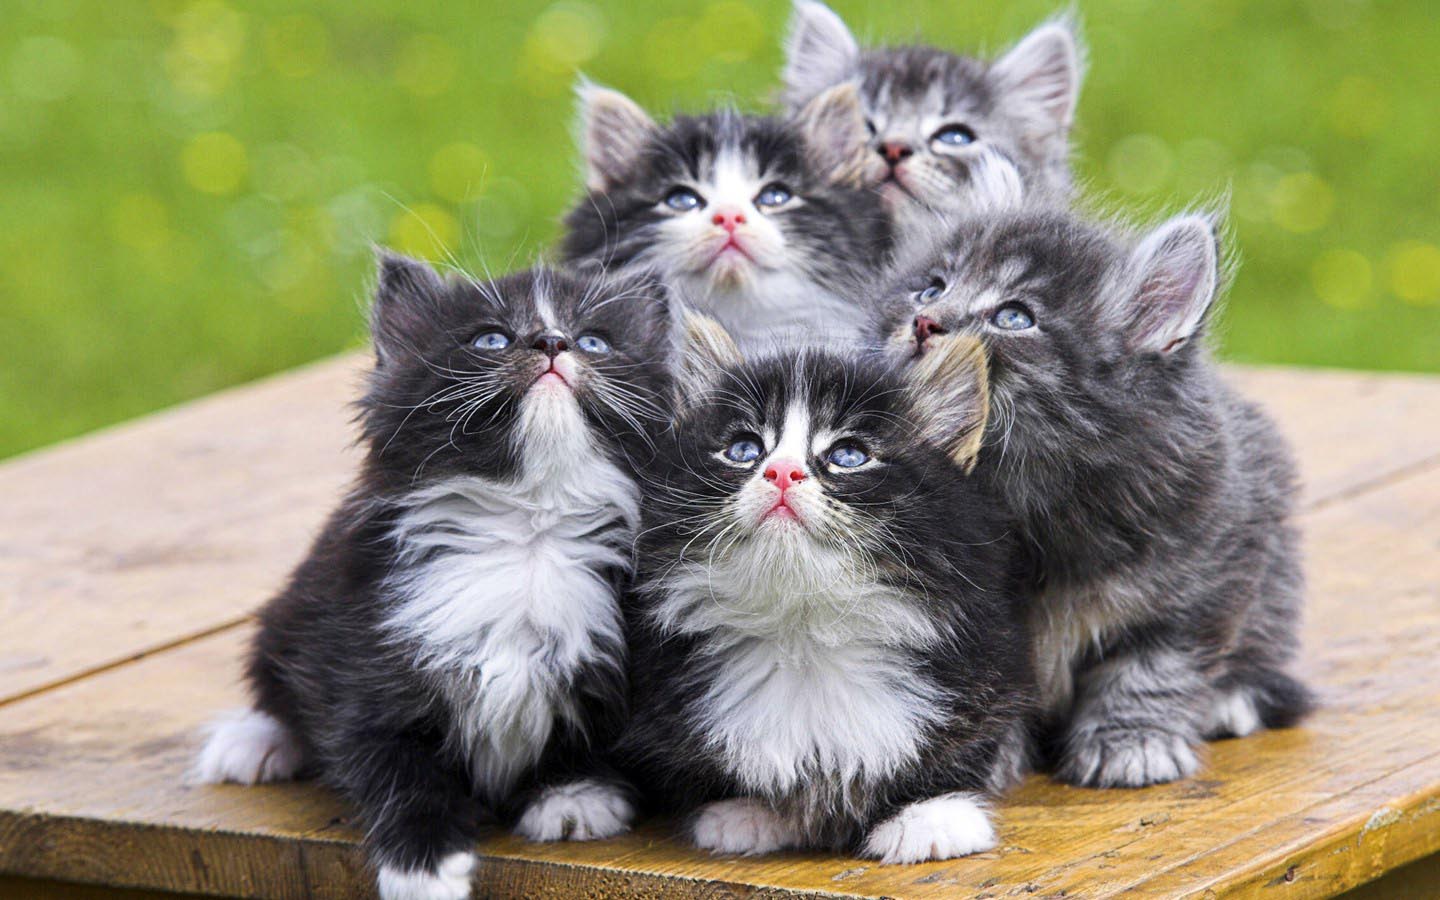 Cute Cats and kittens wallpaper